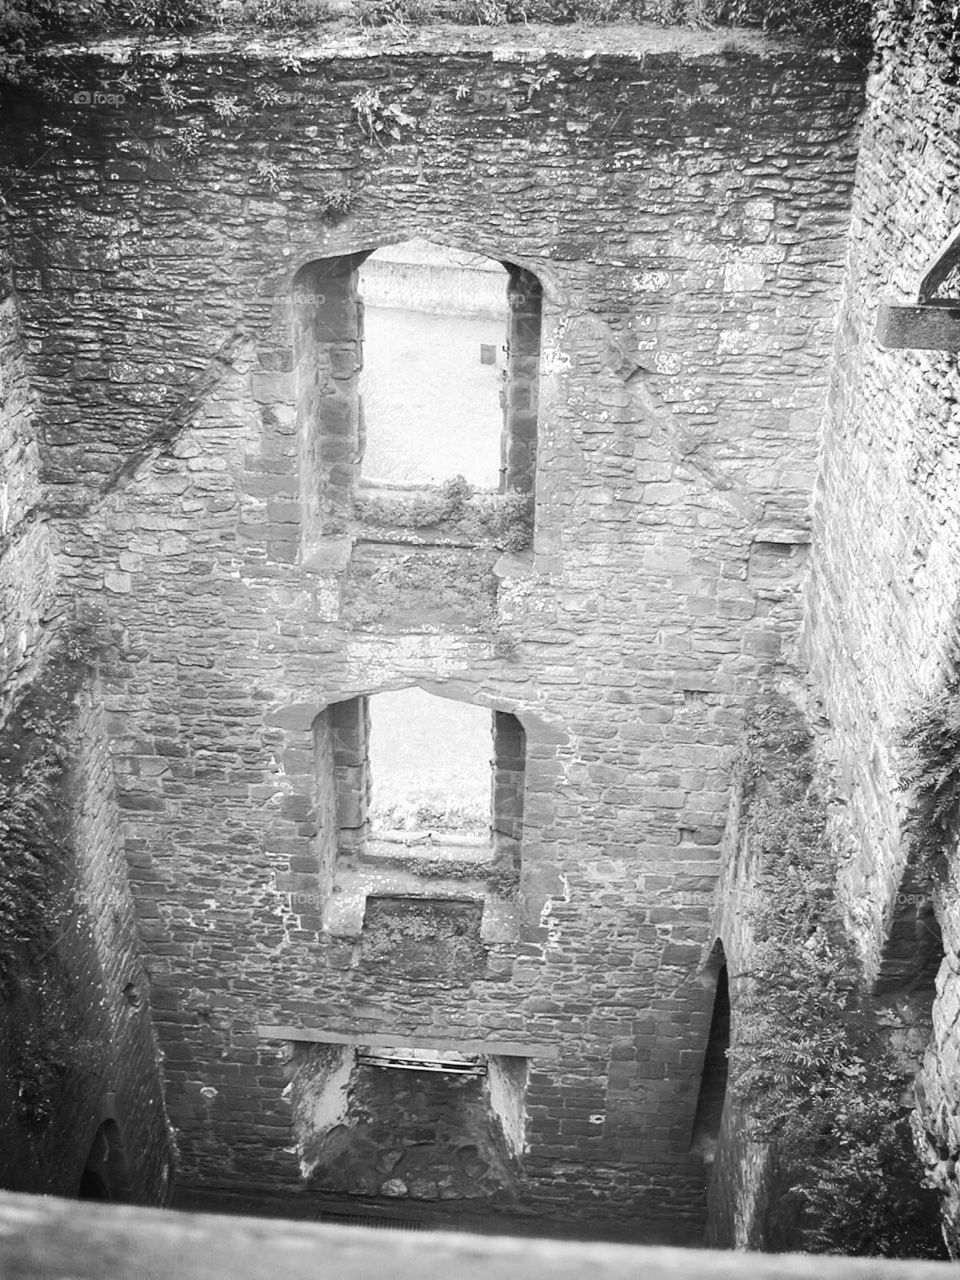 The Great Tower. The Great Tower in Ludlow castle. 